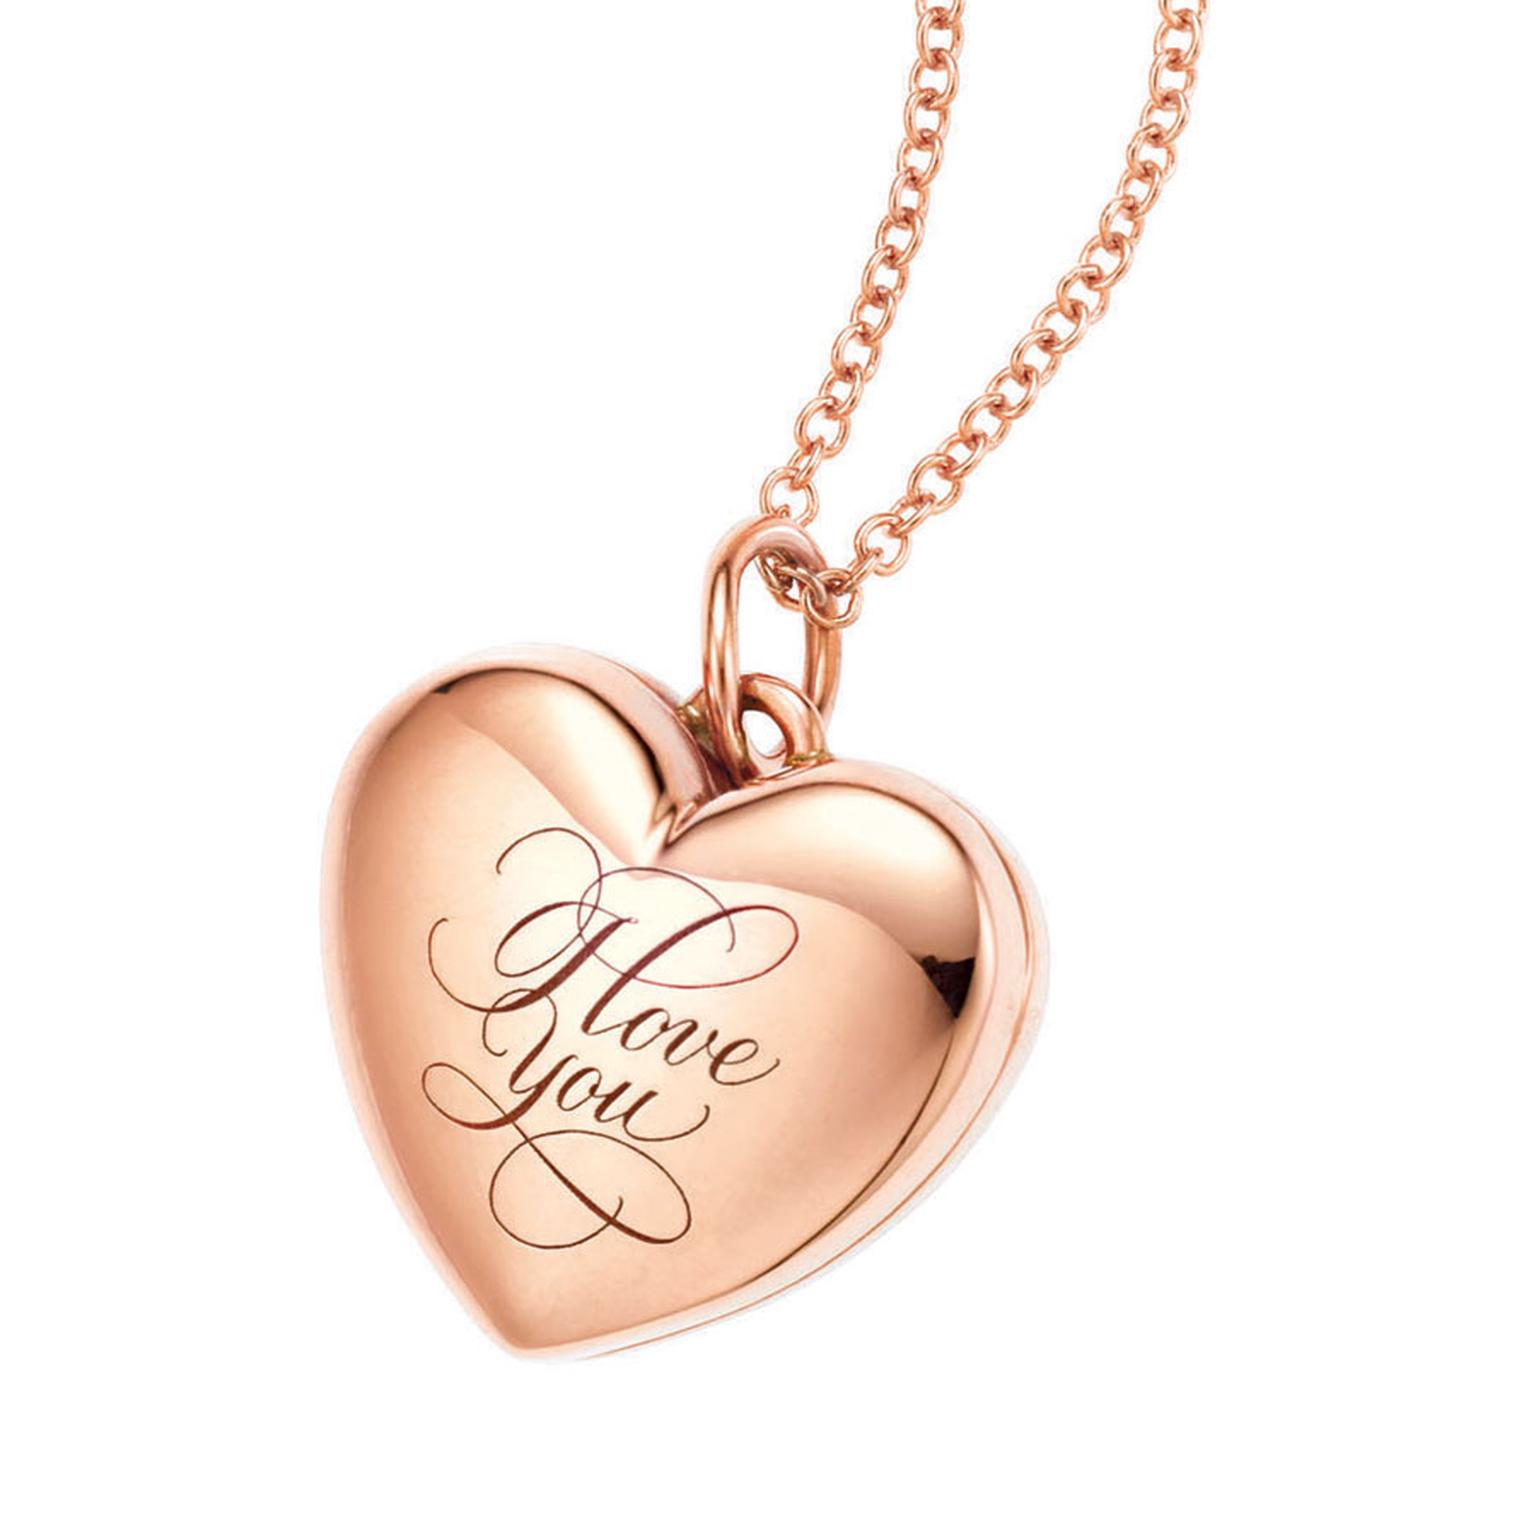 Tiffany I love you locket in rose gold 680GBP and the rose gold Chain 135GBP